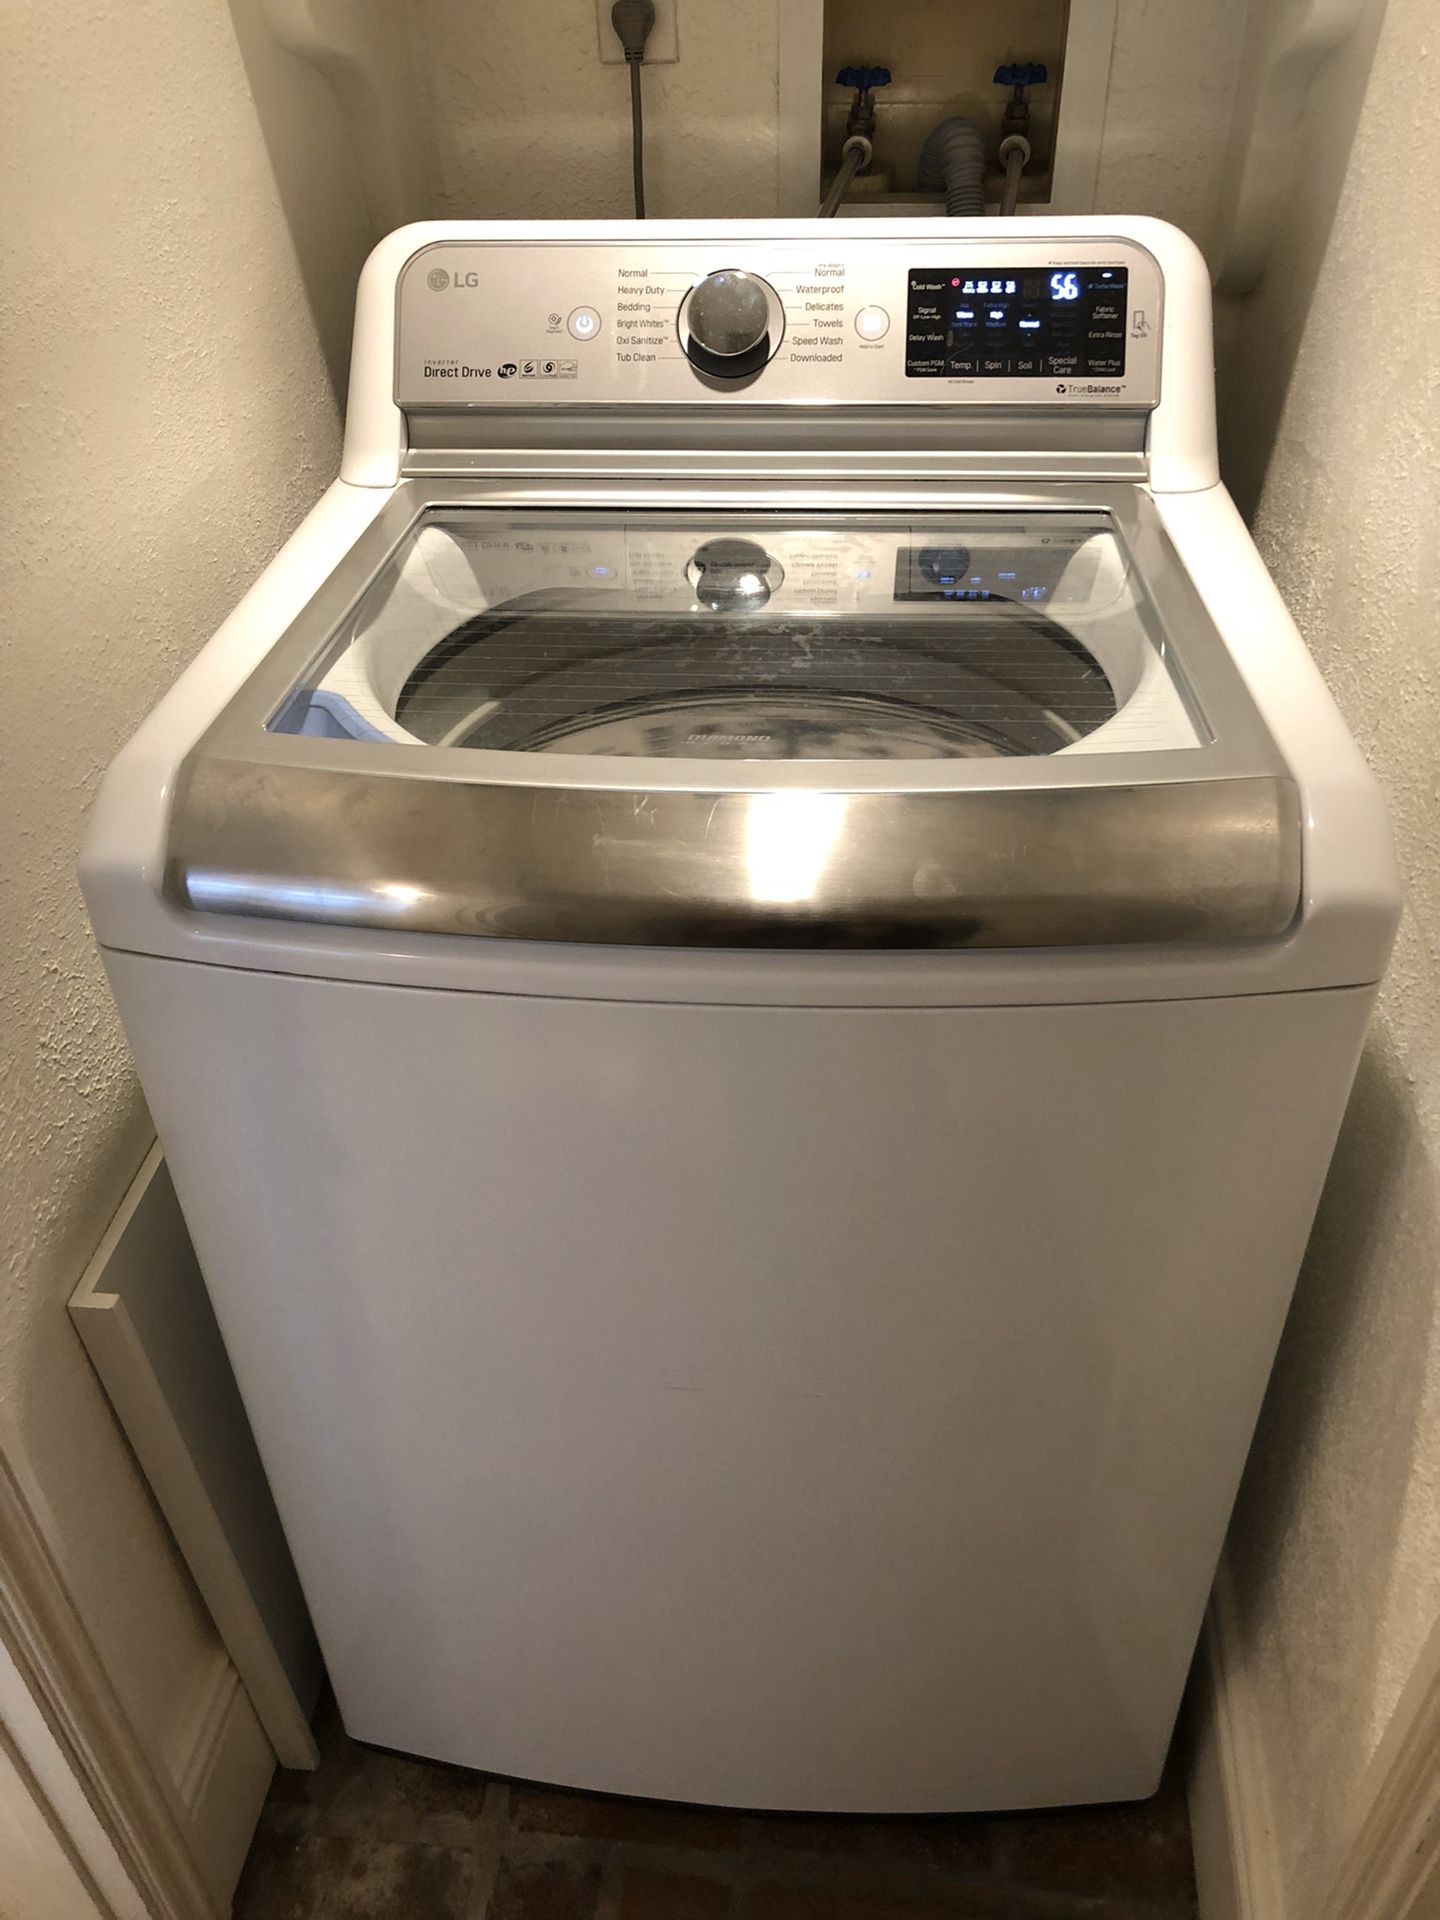 LG washer dryer set - great shape great price!